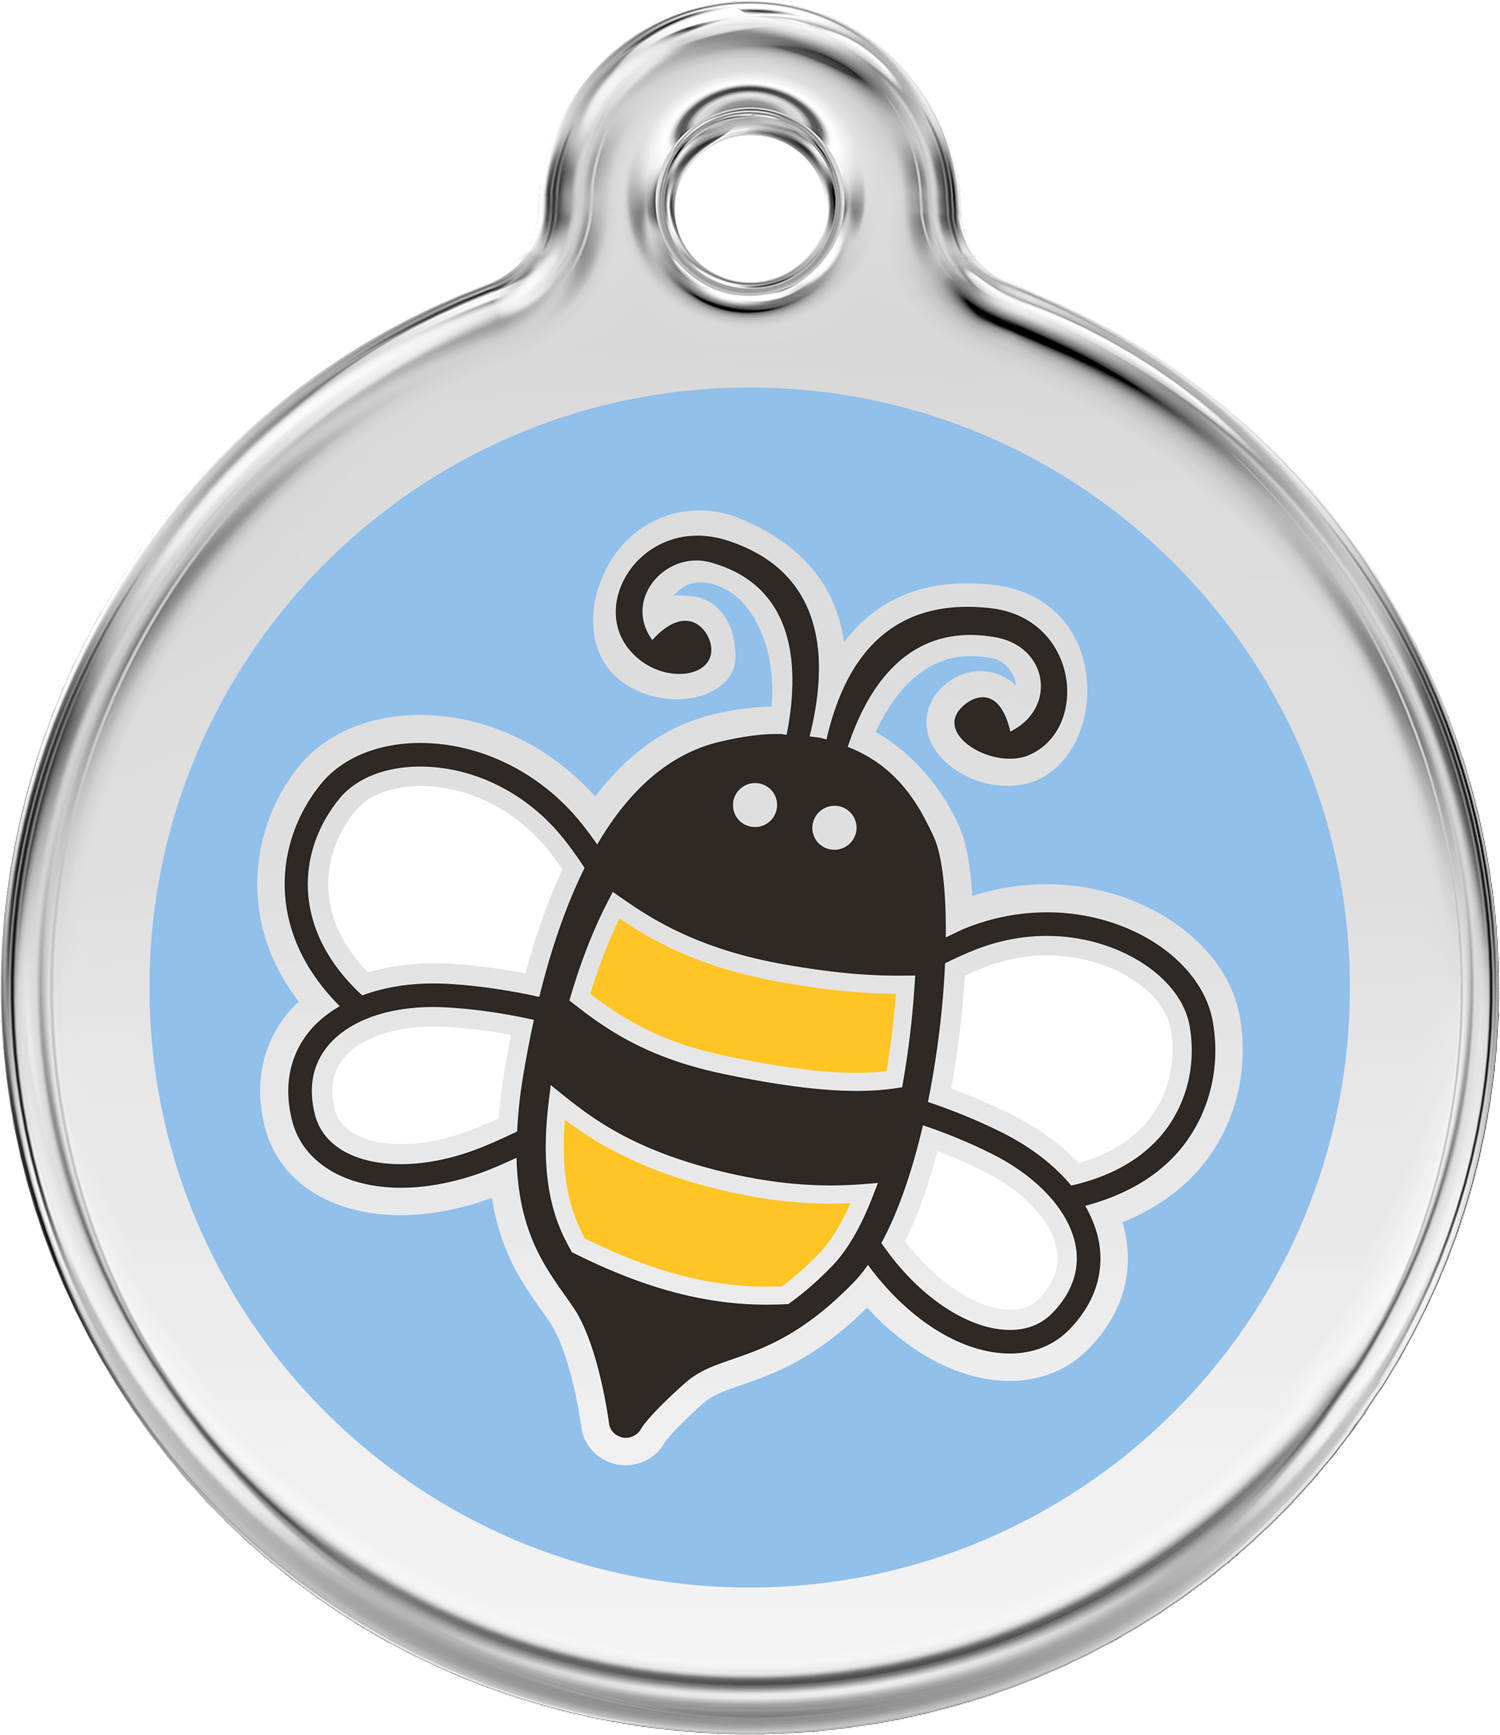 Red Dingo Stainless Steel & Enamel Bumble Bee Dog ID Tag - Light Blue